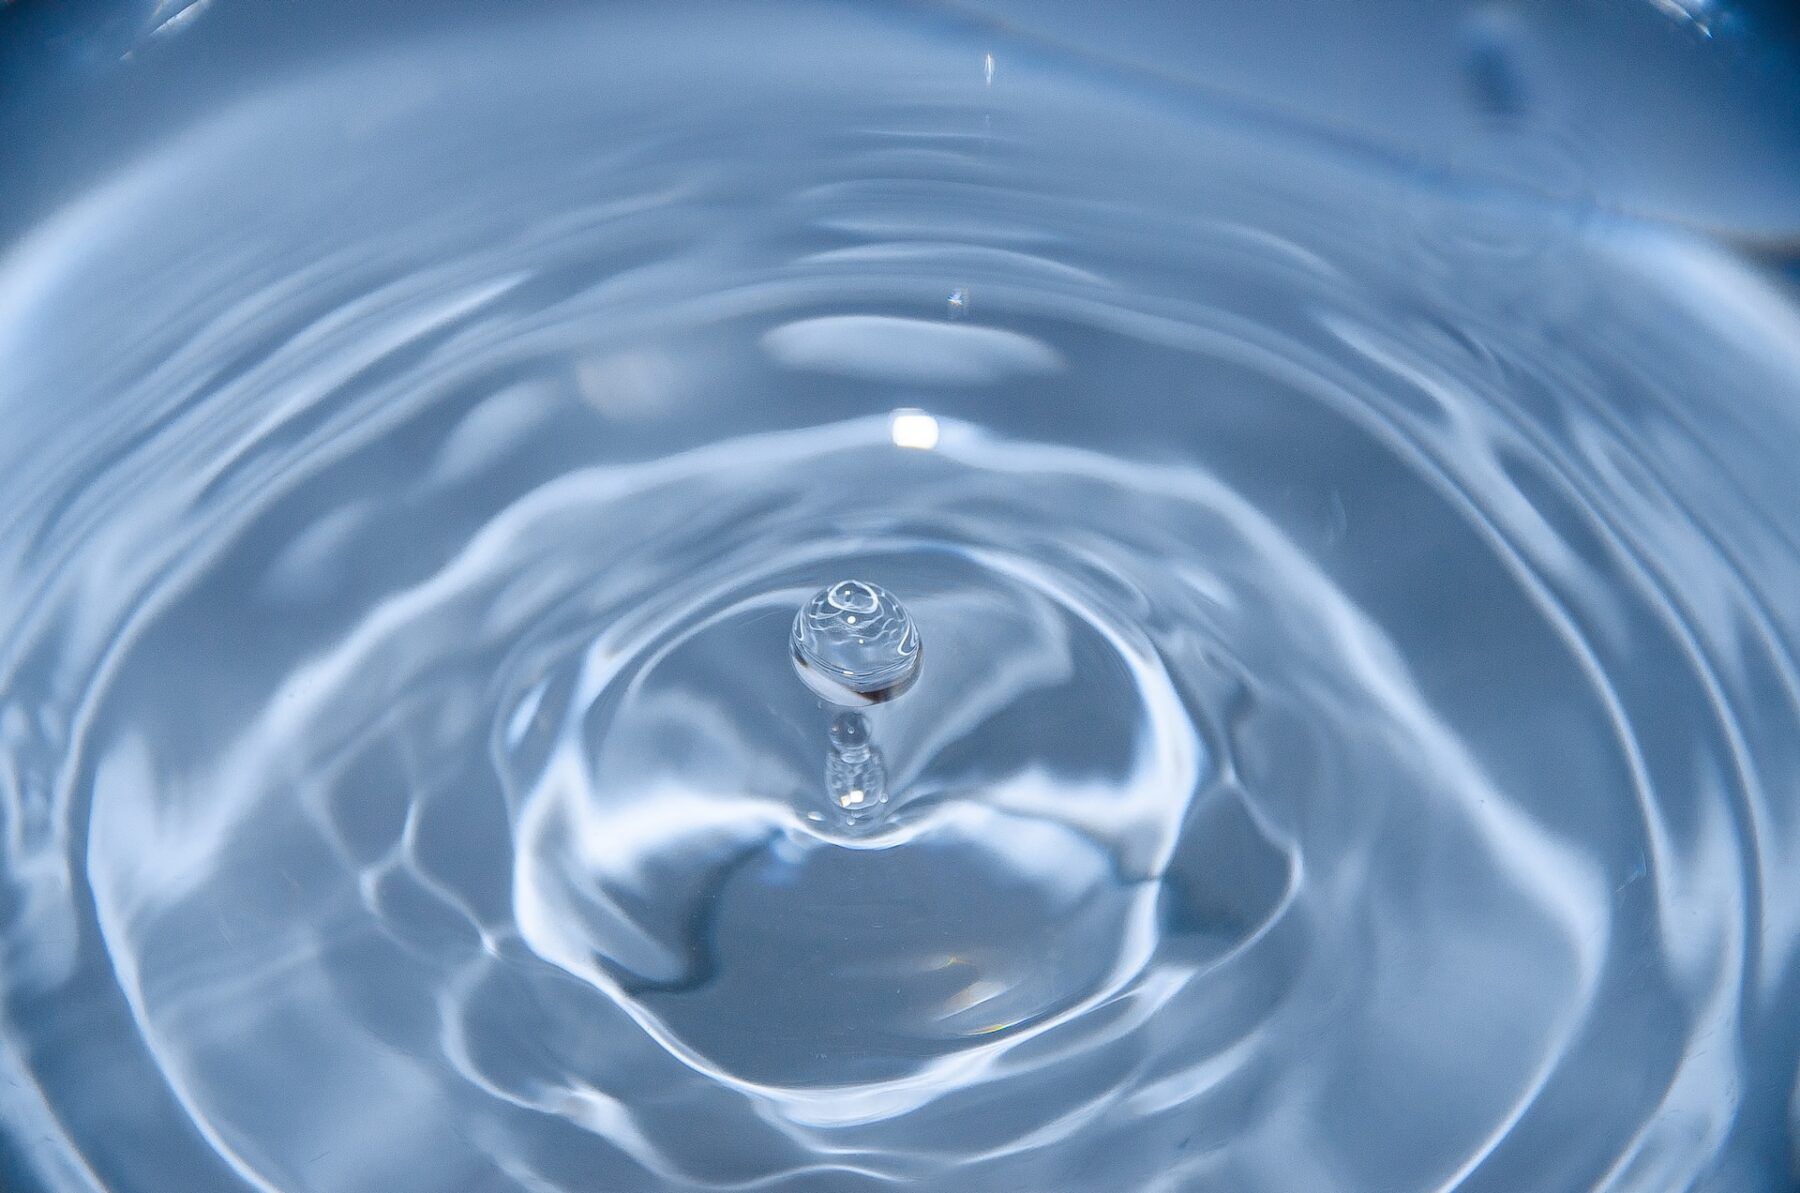 zoomed in image of water where a drop is about to fall on the surface. Previous drops have caused a ripple effect towards the wider edge of the image.